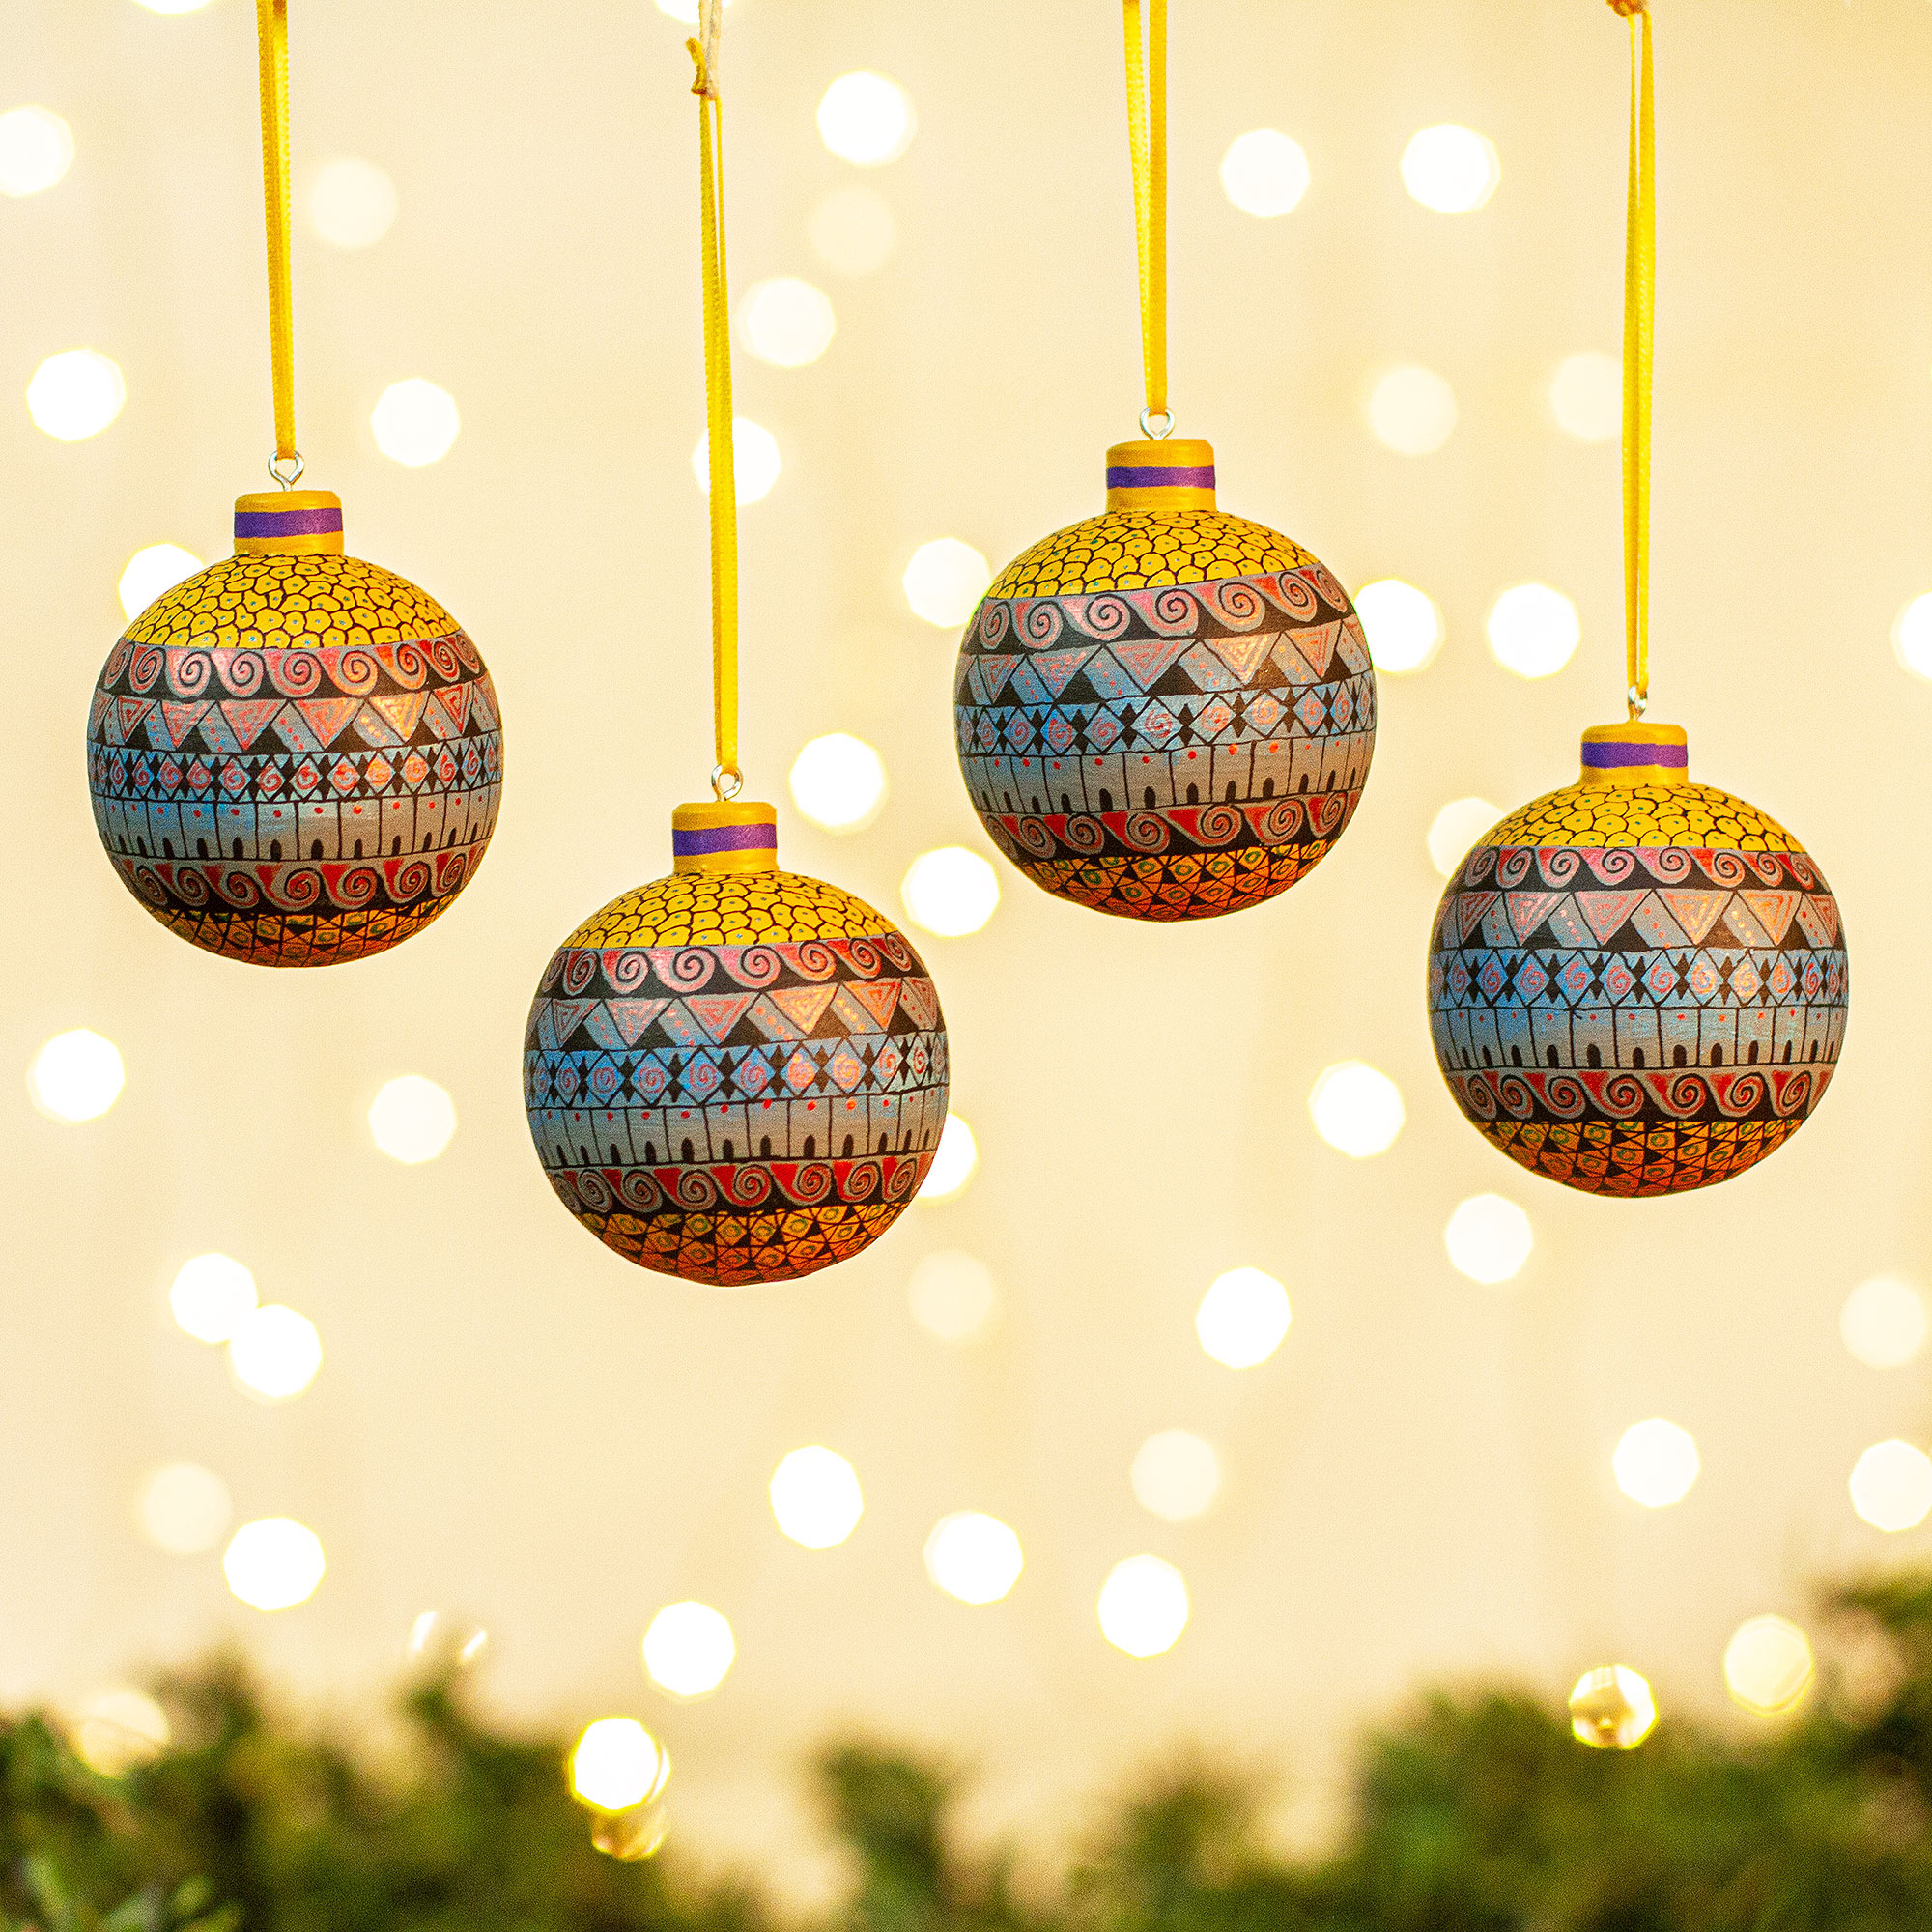 Hand painted Wooden Ornaments